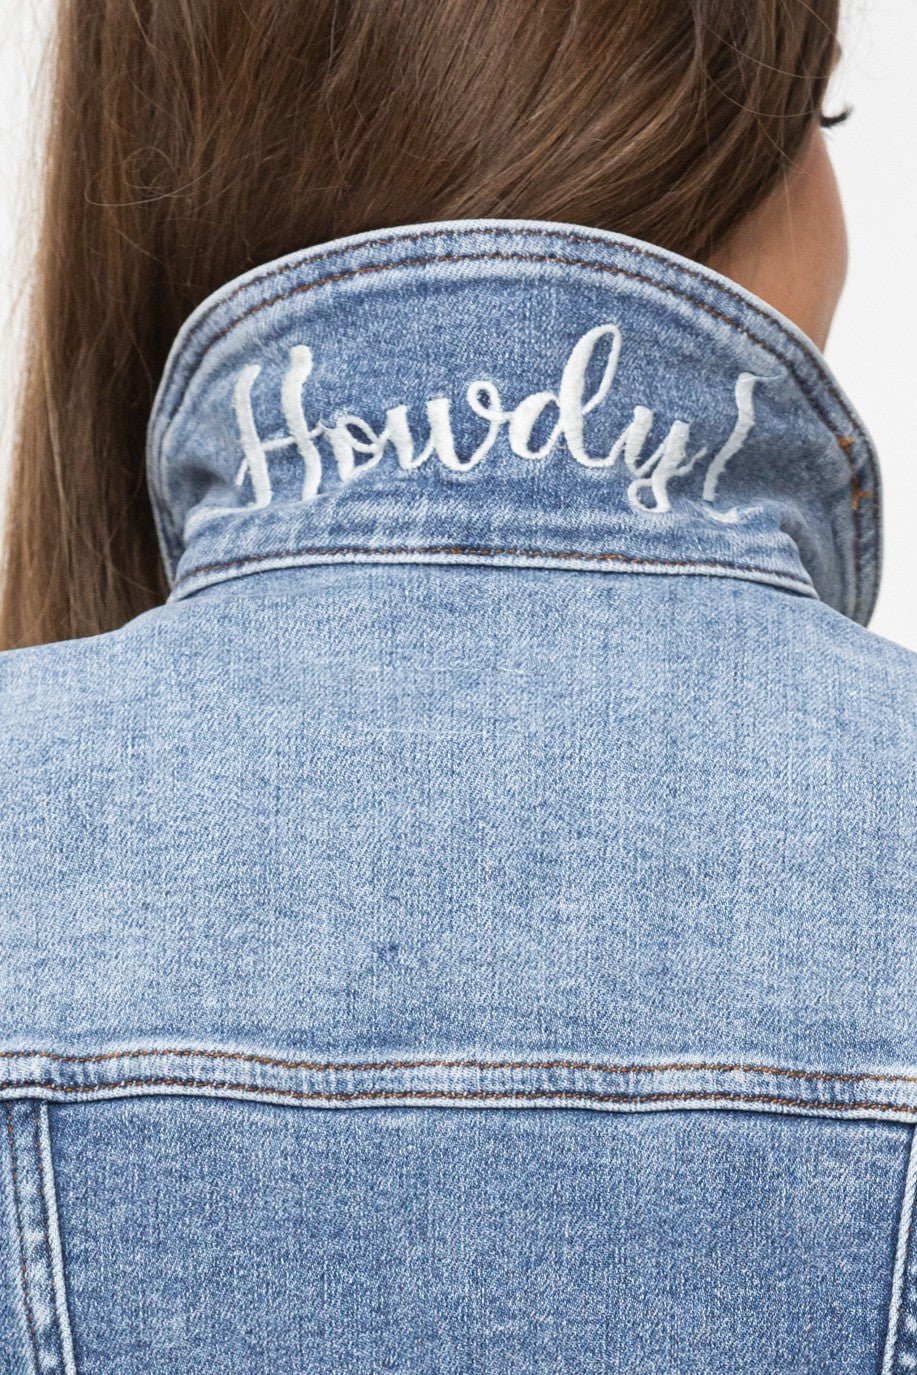 HOWDY JUDY BLUE DENIM JACKET - CountryFide Custom Accessories and Outdoors